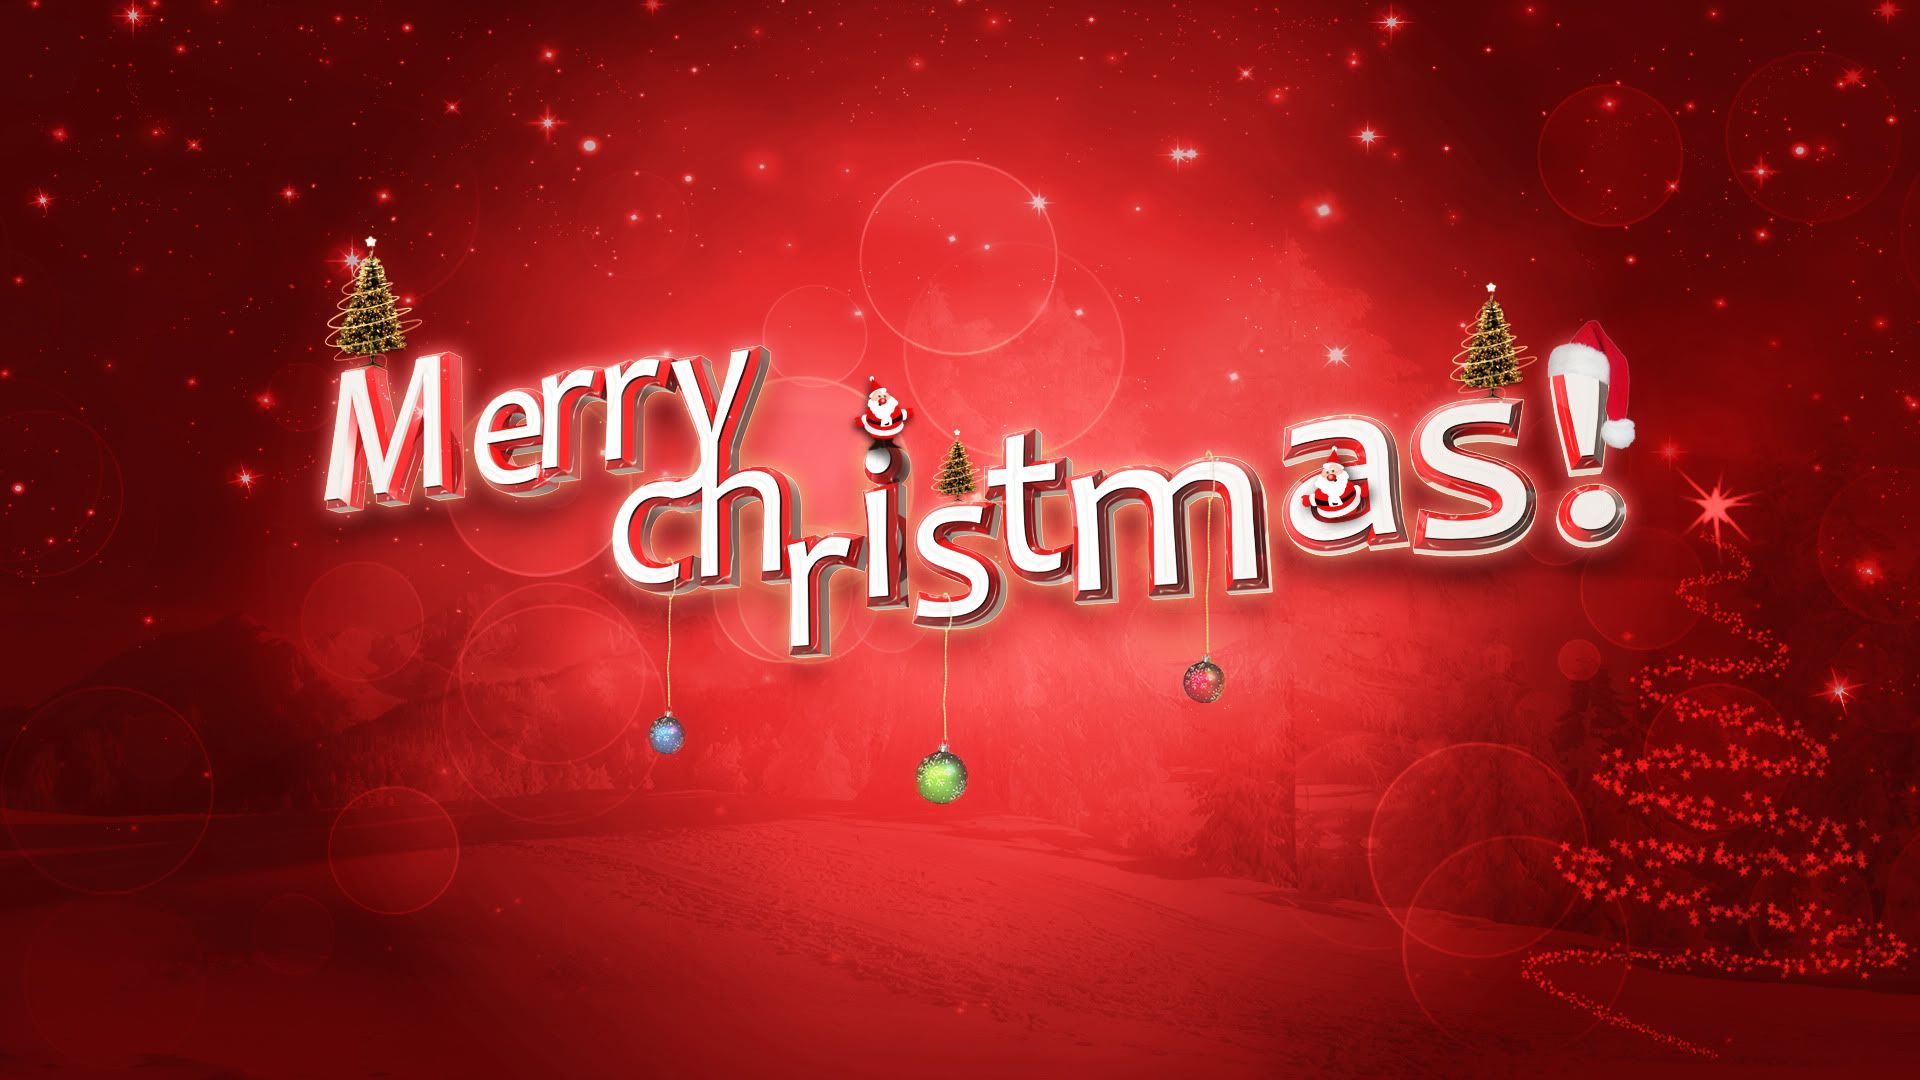 Advance Merry Christmas 2015 Images Pictures Whatsapp dp Fb Covers ...